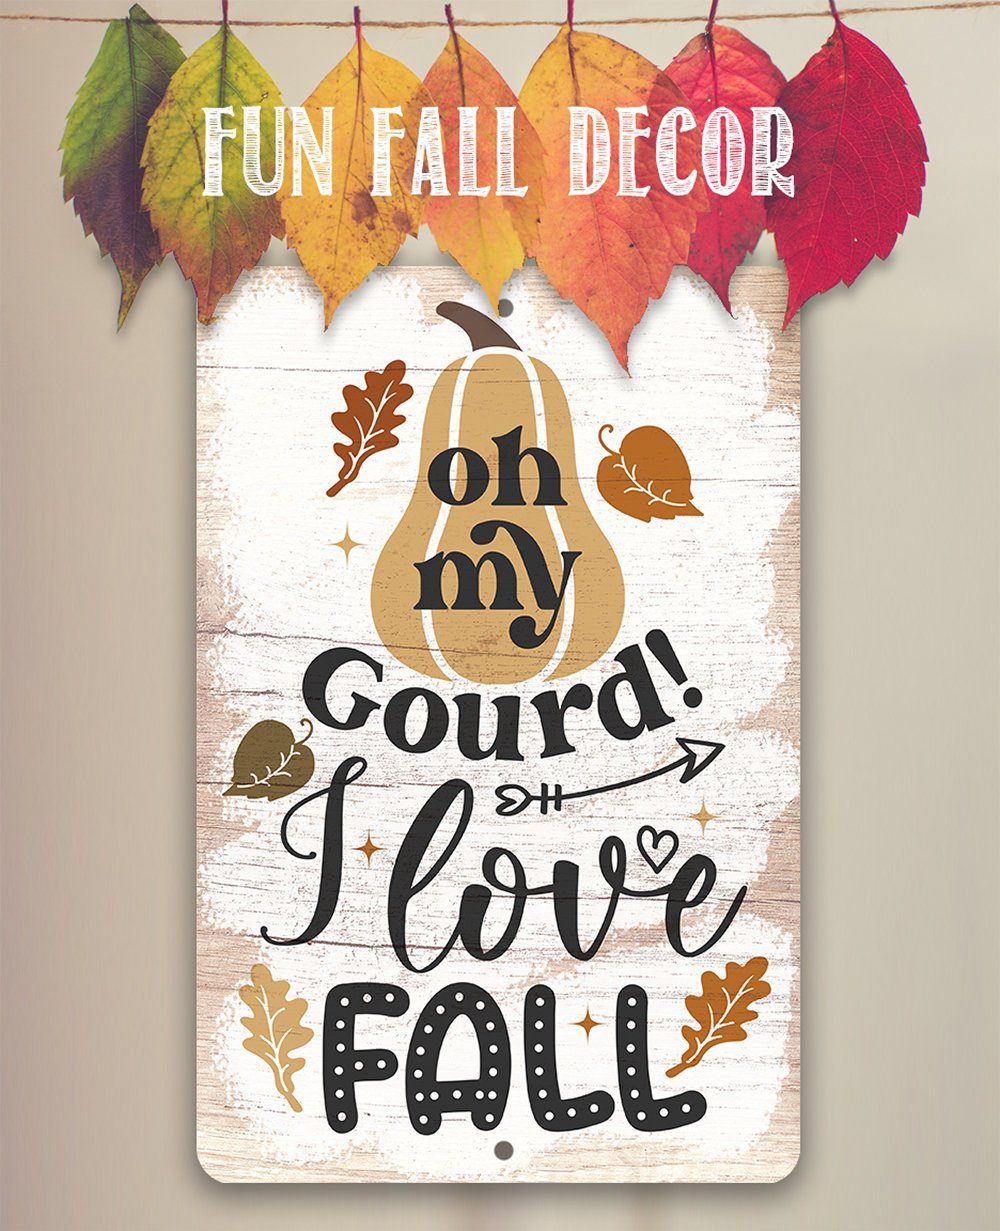 Oh My Gourd I Love Fall - Metal Sign | Lone Star Art.